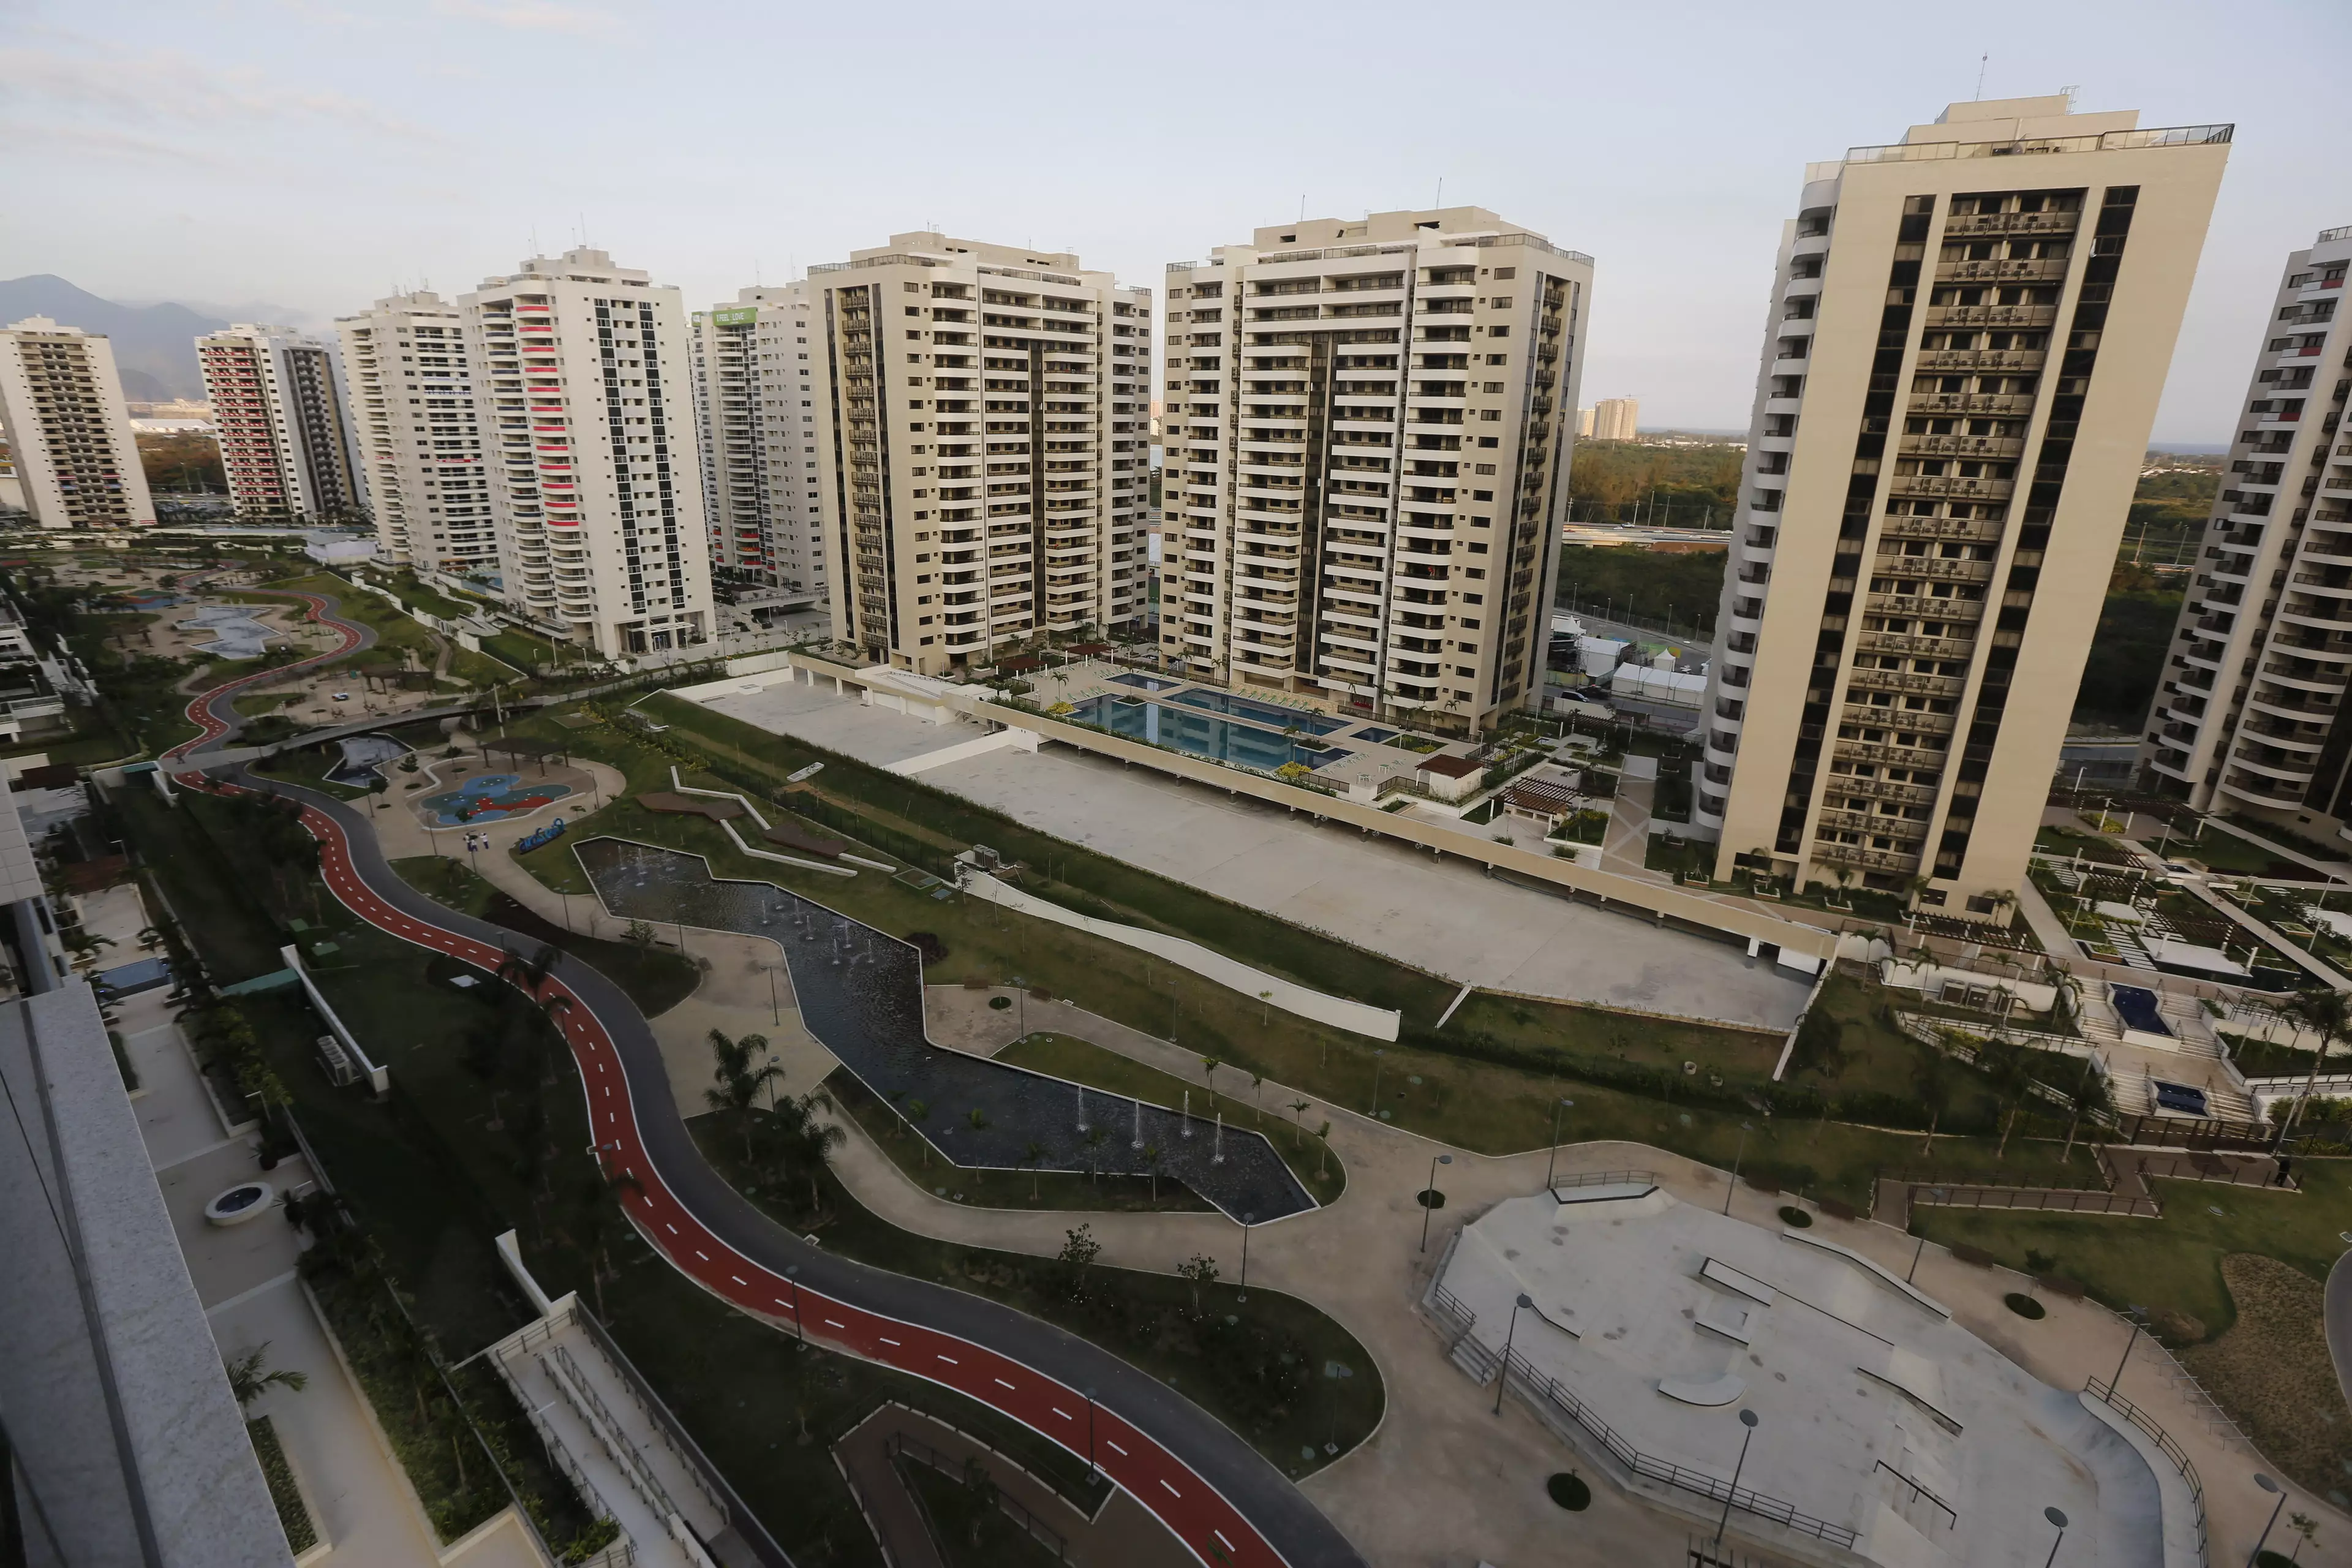 The New Olympic Village Described As 'Unlivable' By Officials